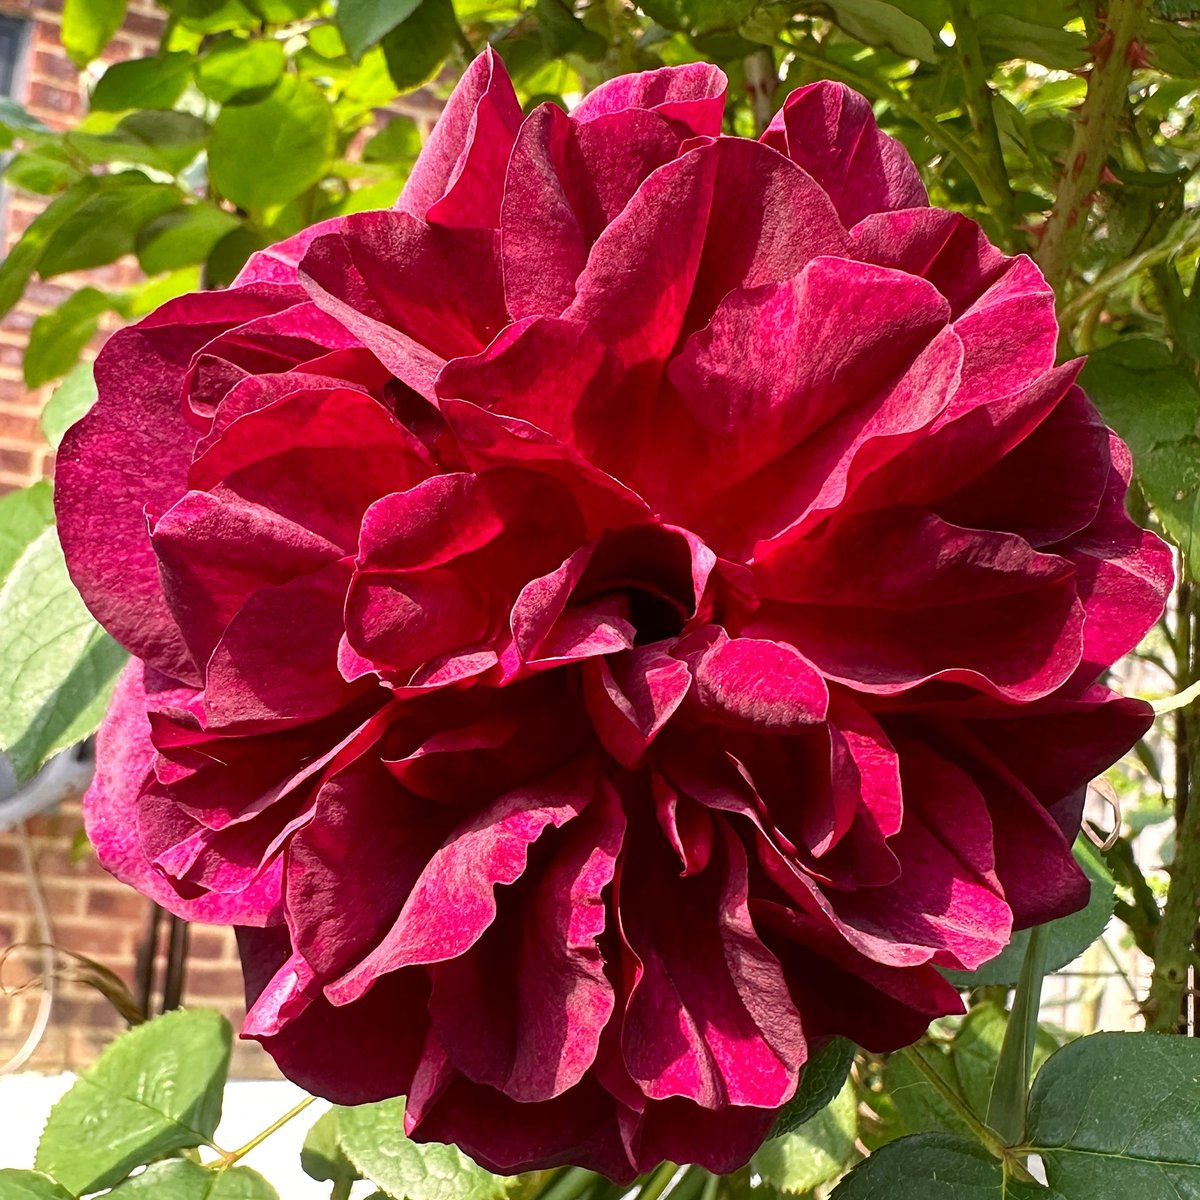 A little bit of sun & magic happens ☀️Rose Munstead Wood, first bloom of the year 🌹❤️#Flowers #Gardening #Roses